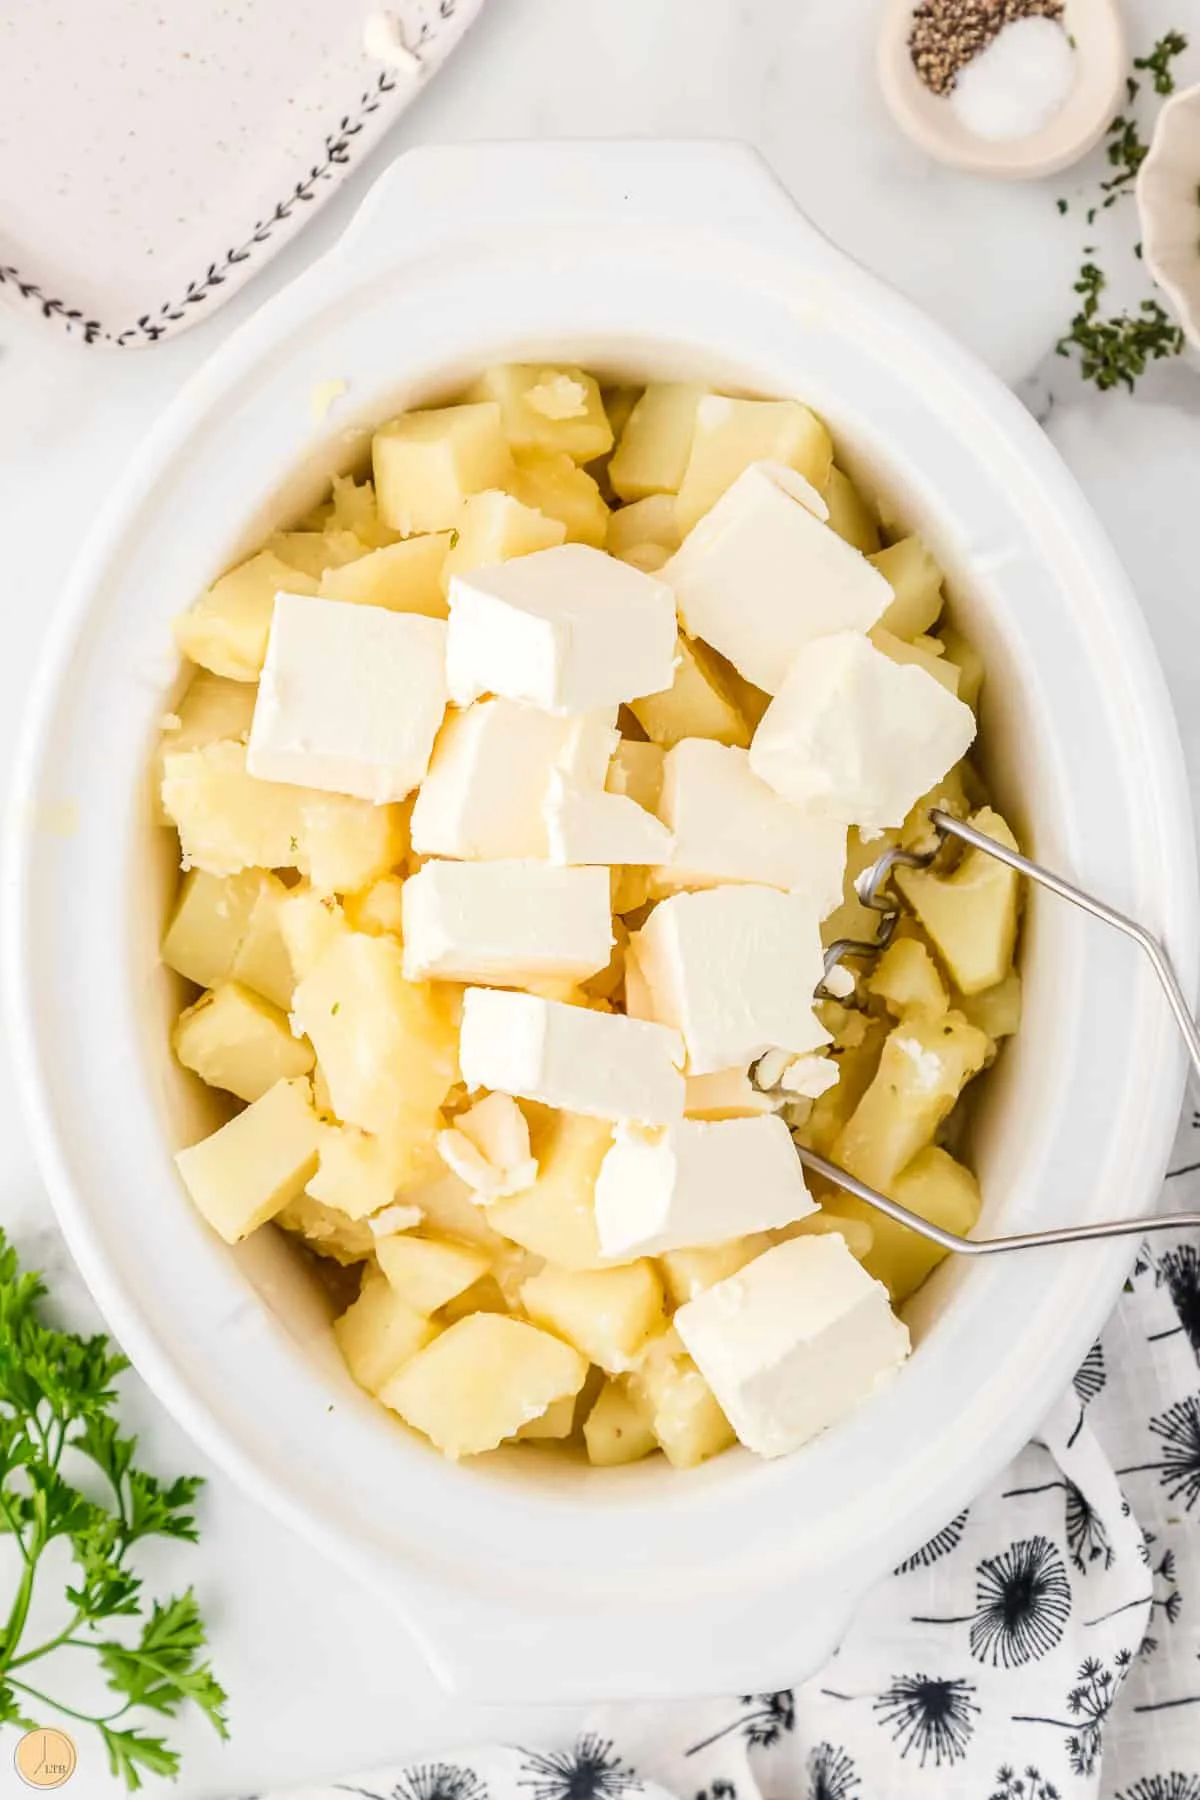 cream cheese cubes on diced potatoes